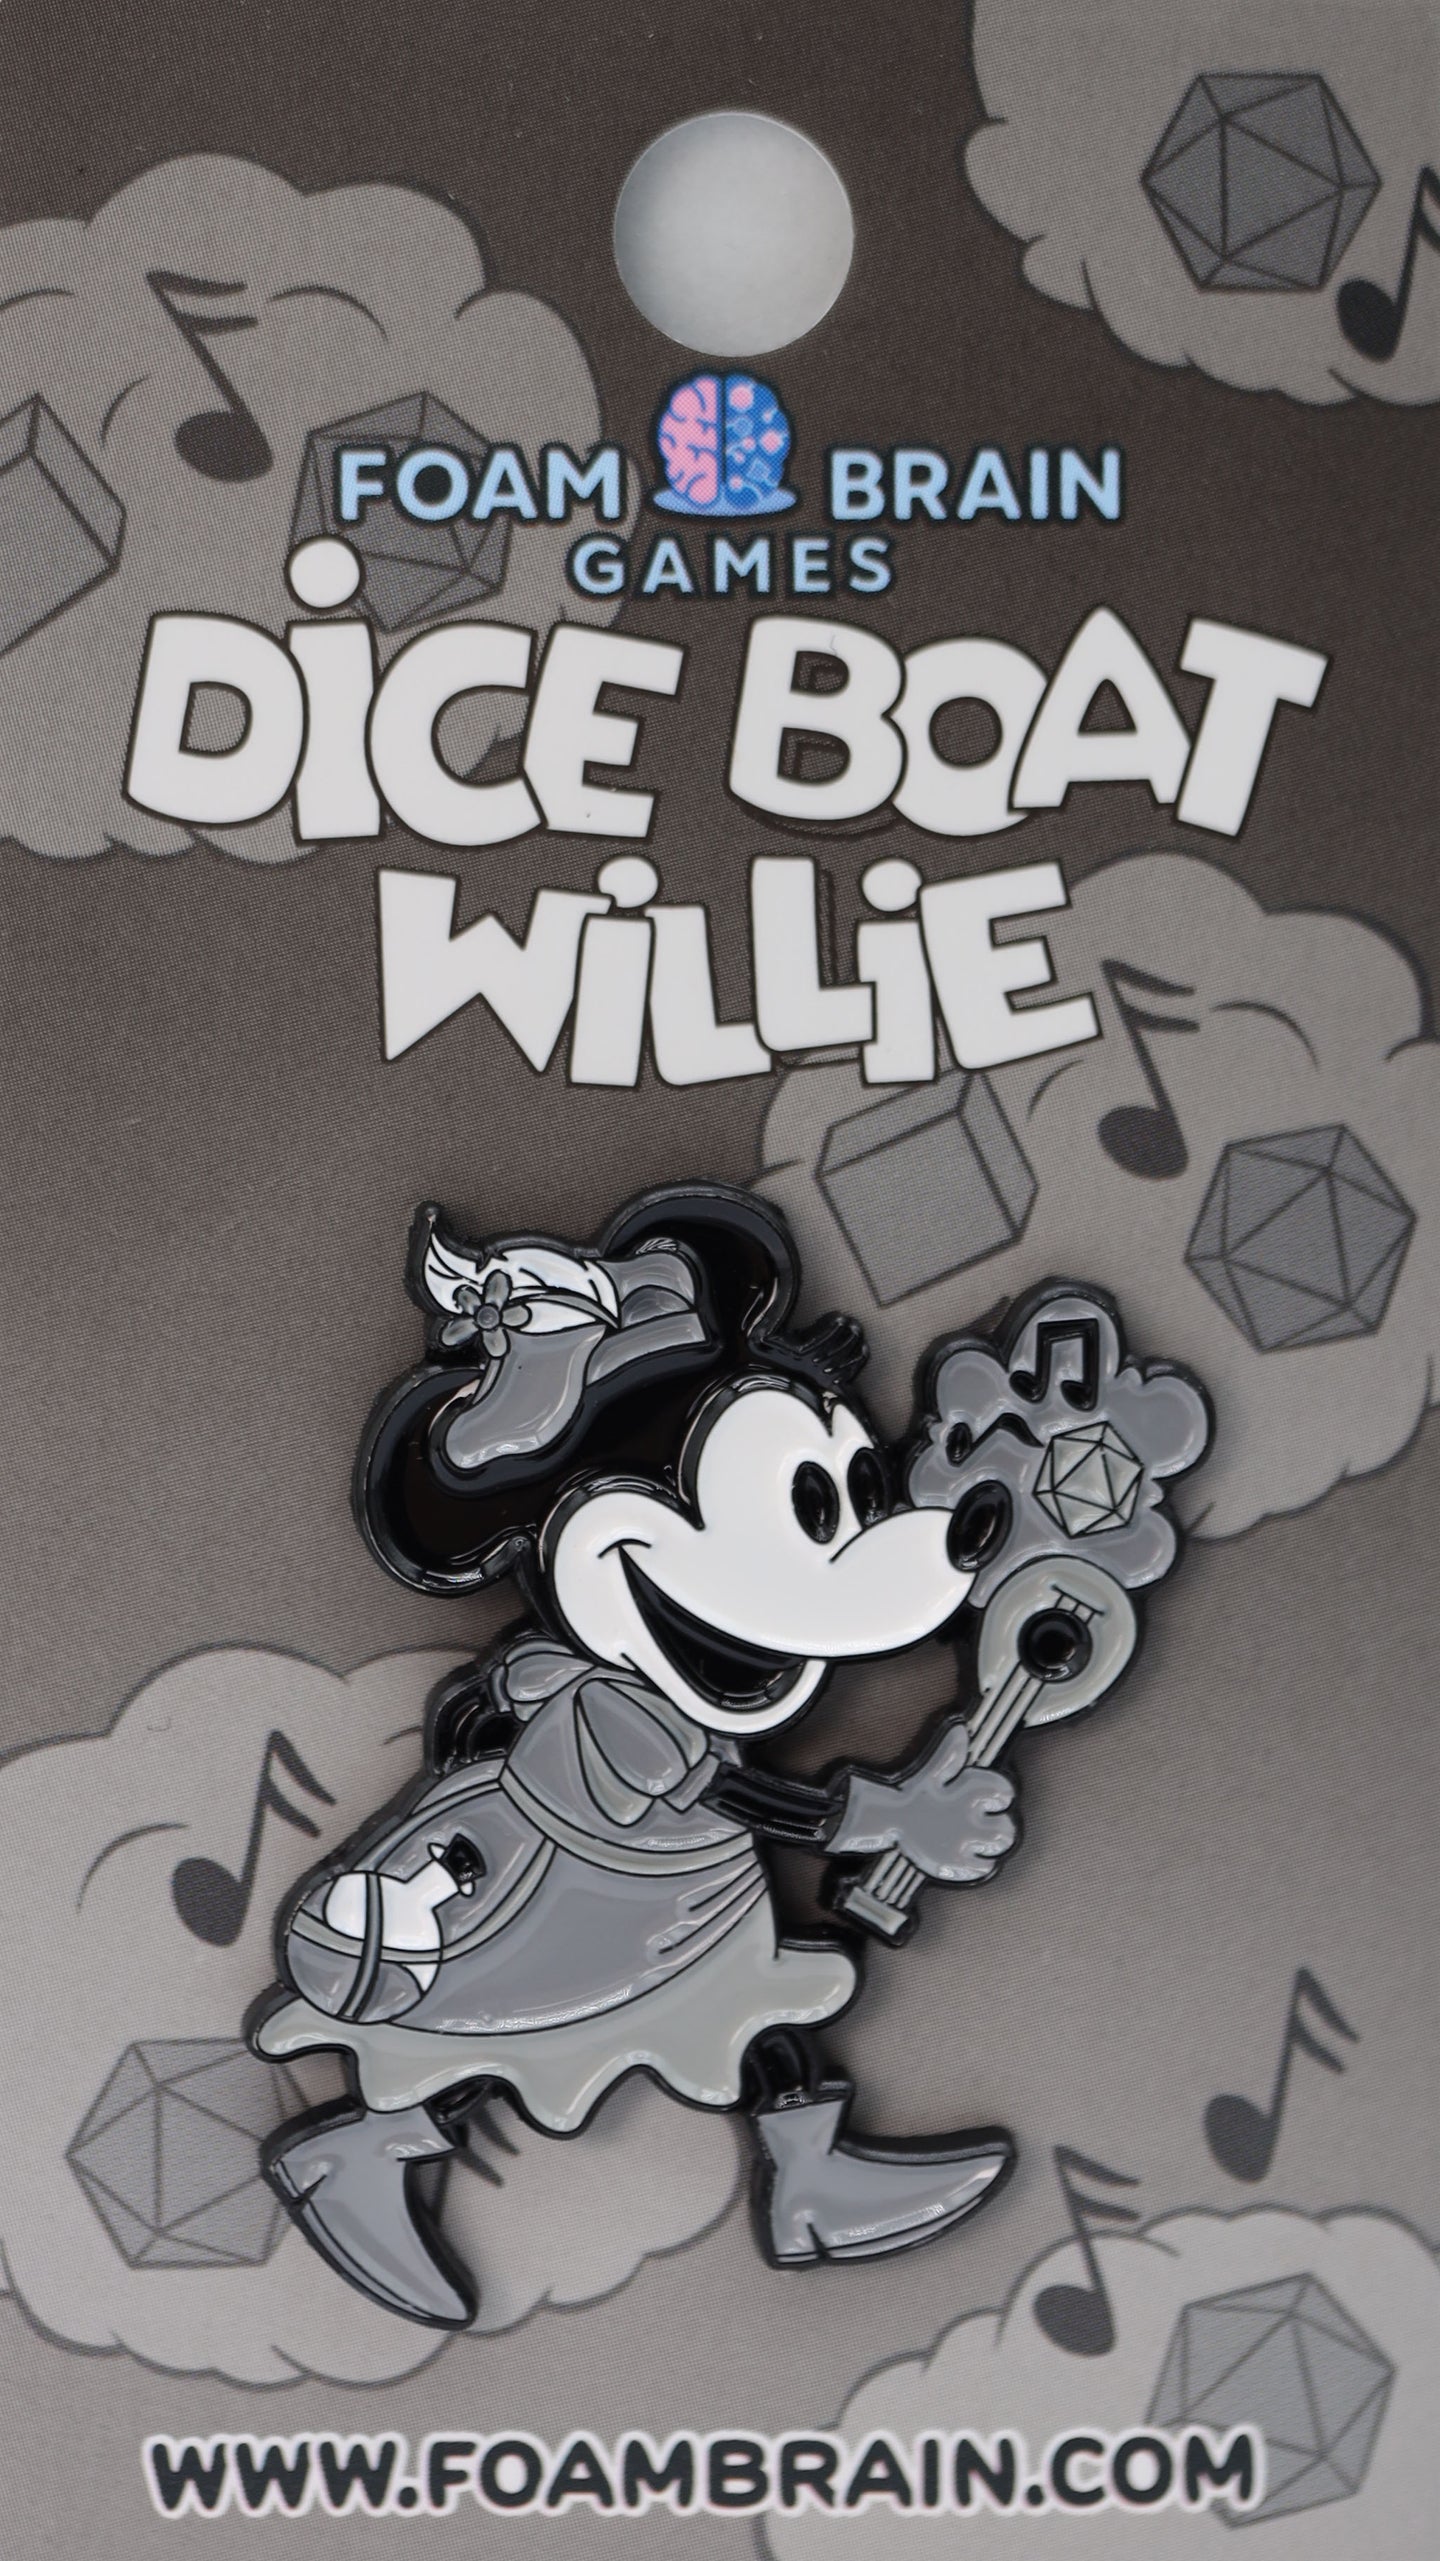 Dice Boat Willie Enamel Pin - Bards & Cards